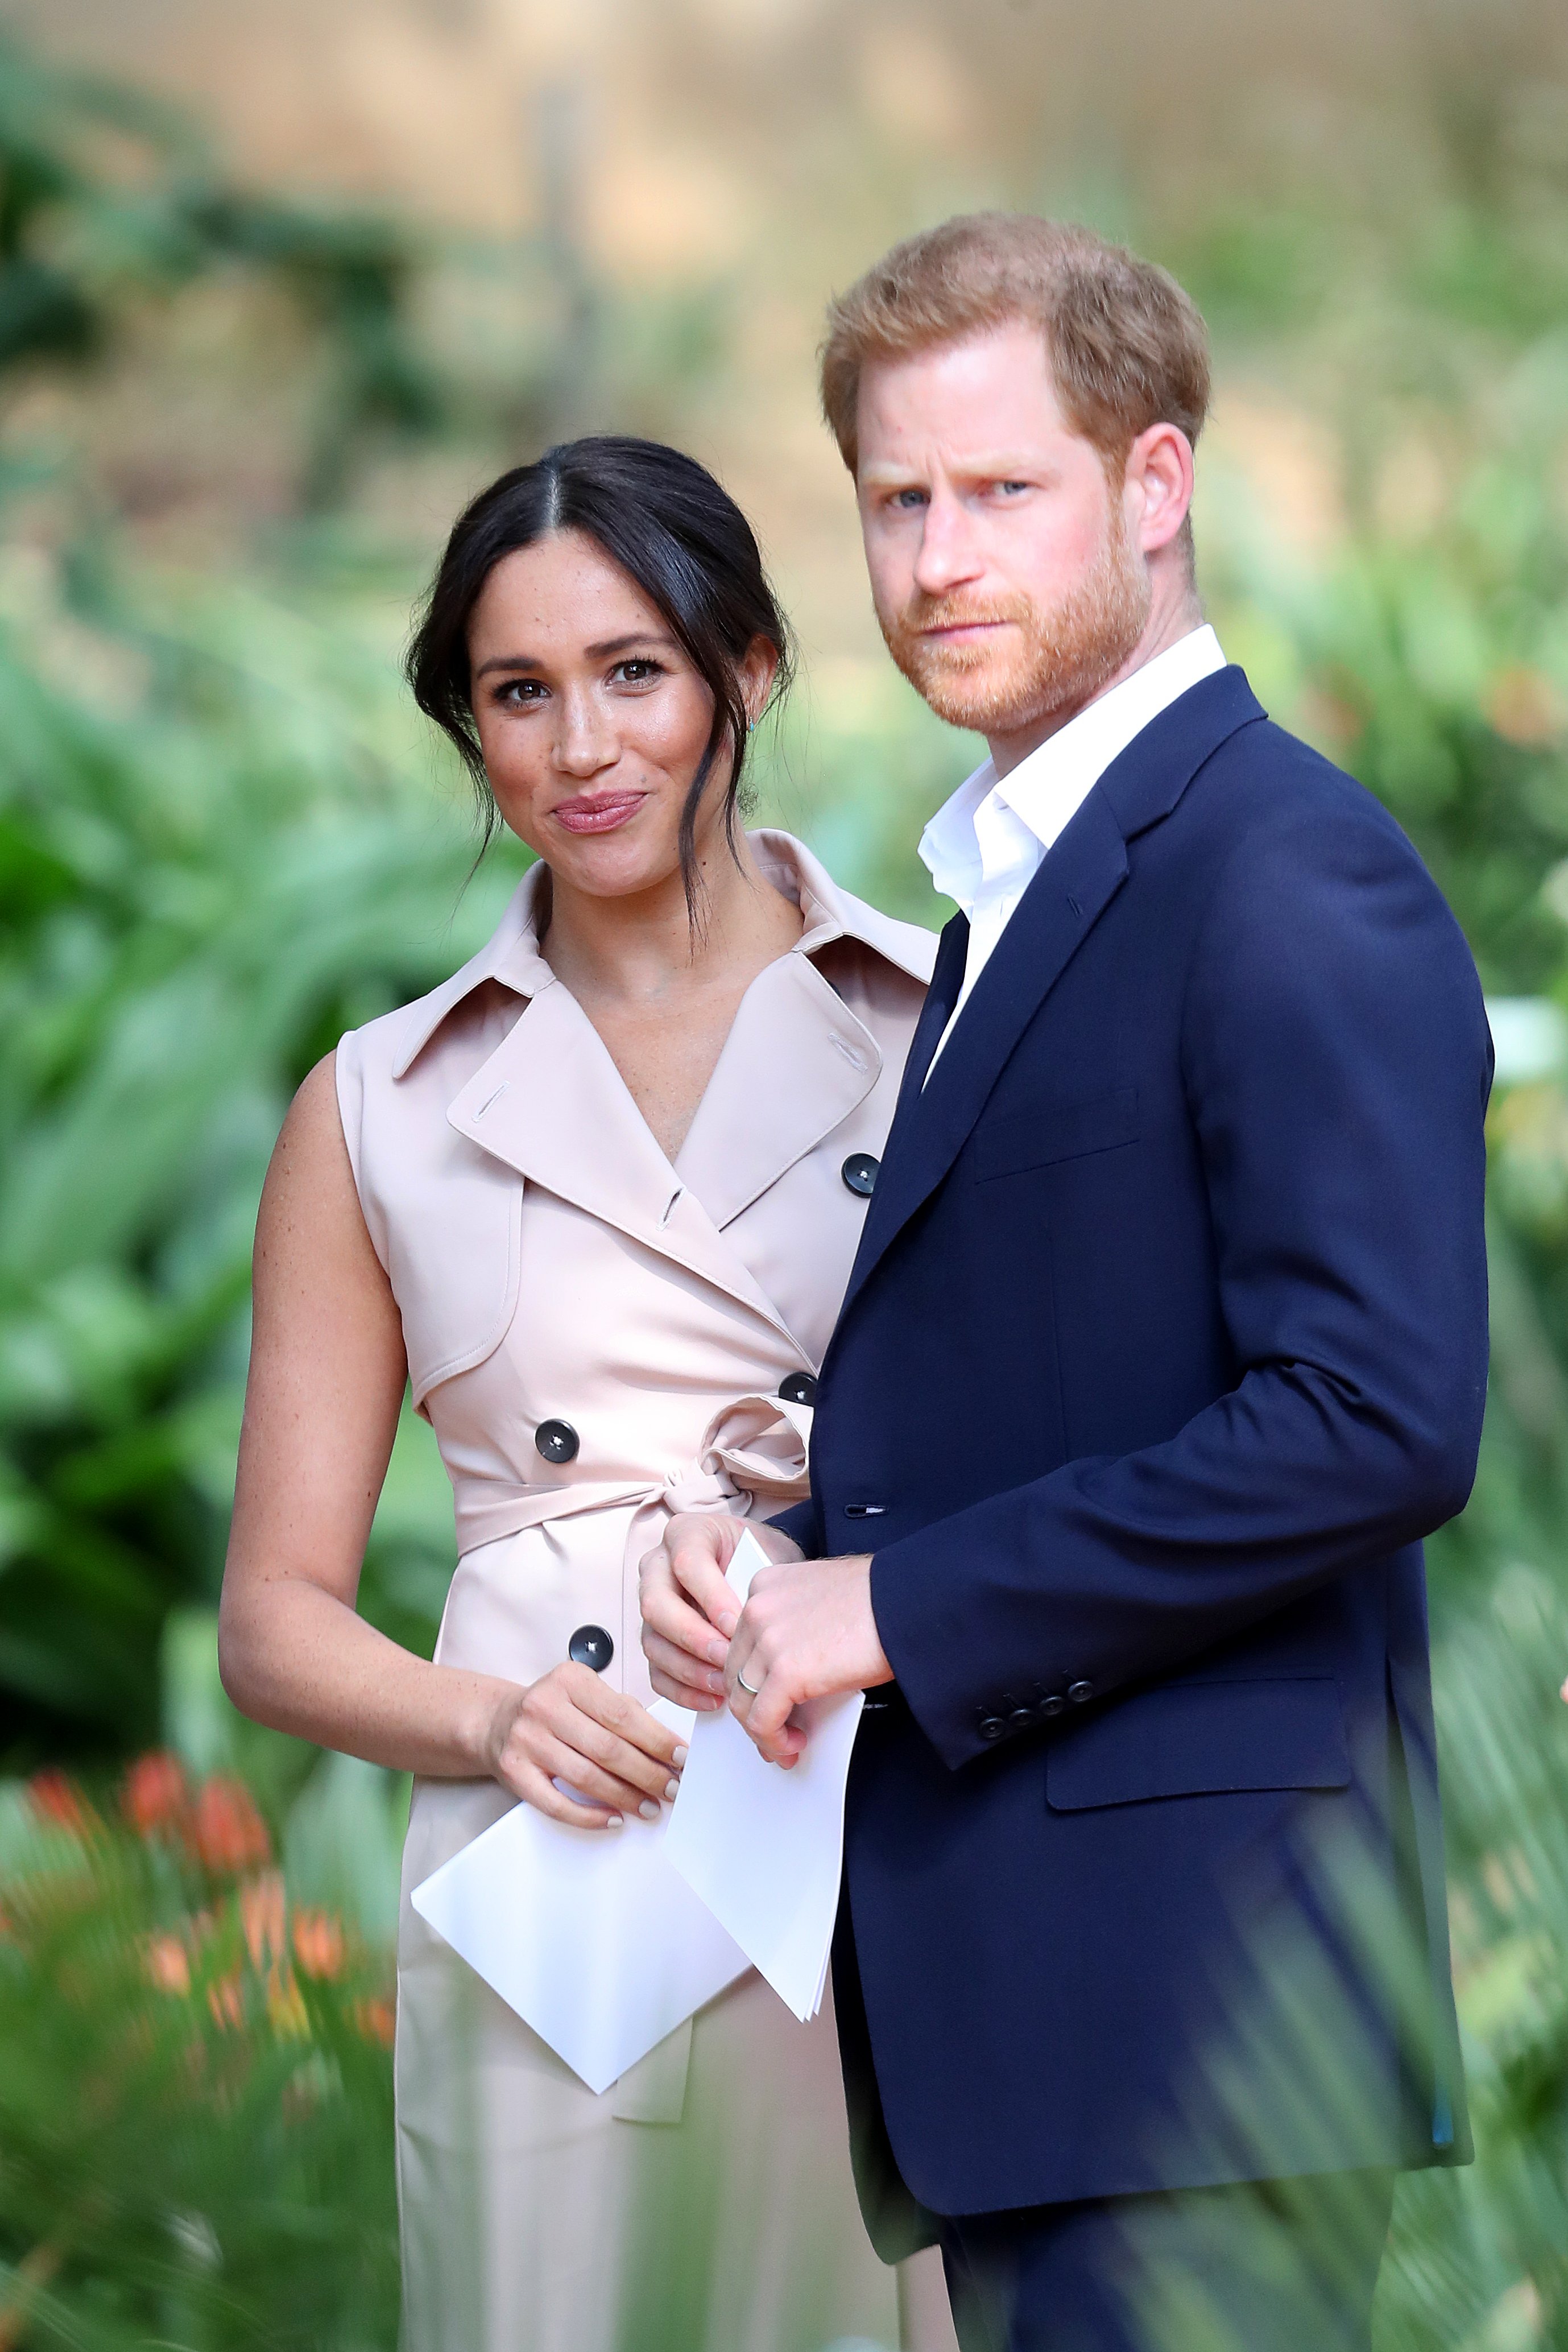 Prince Harry and Meghan Markle on October 02, 2019 in Johannesburg, South Africa. | Photo: Getty Images